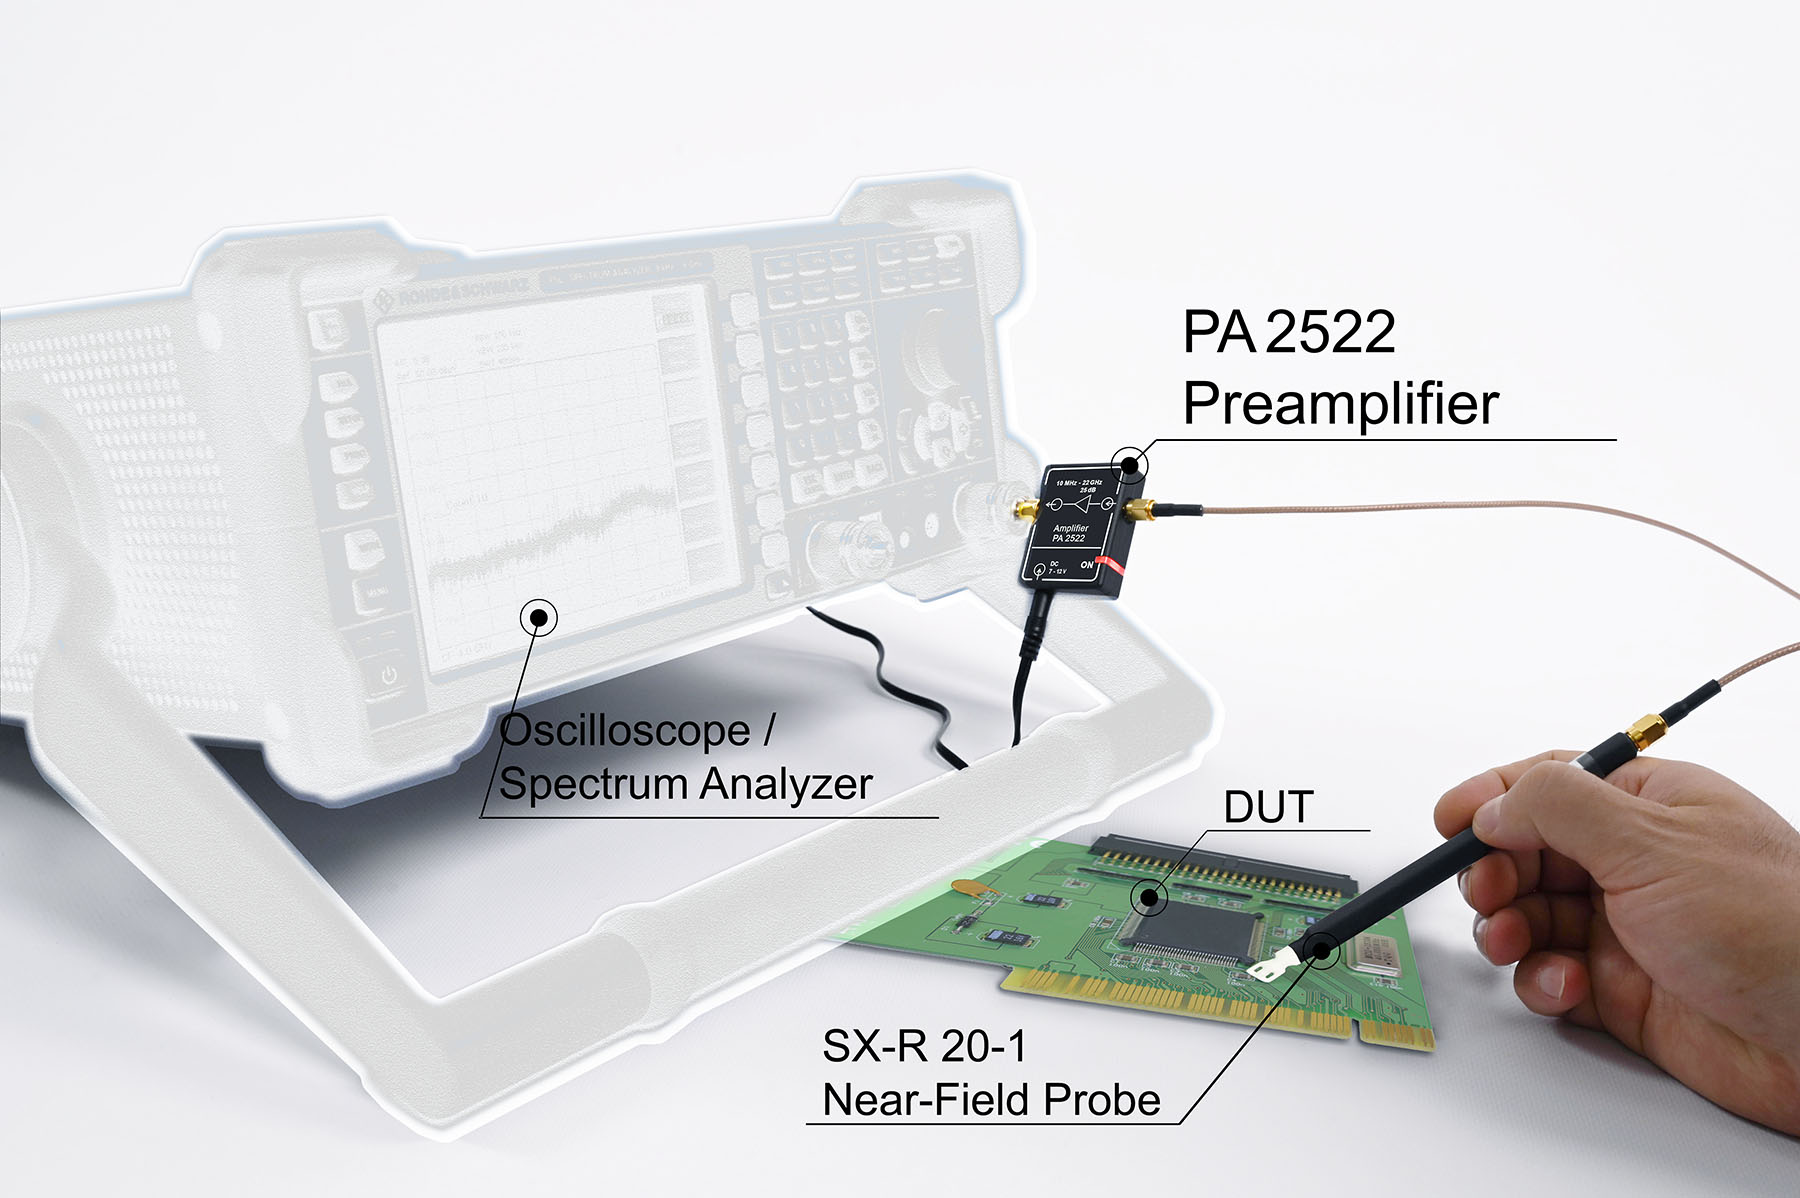 Measurement set-up with PA 2522